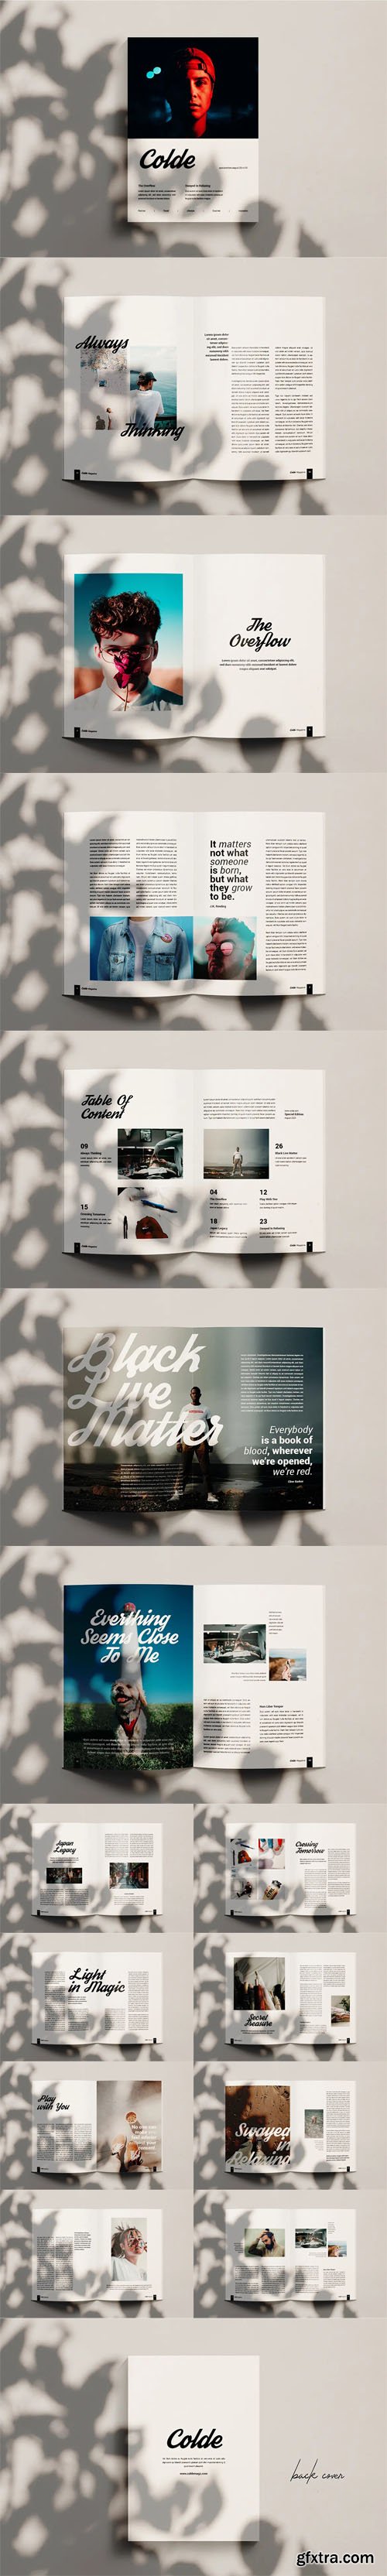 Colde - Fashion Magazine Indesign Template [A4/US Letter]